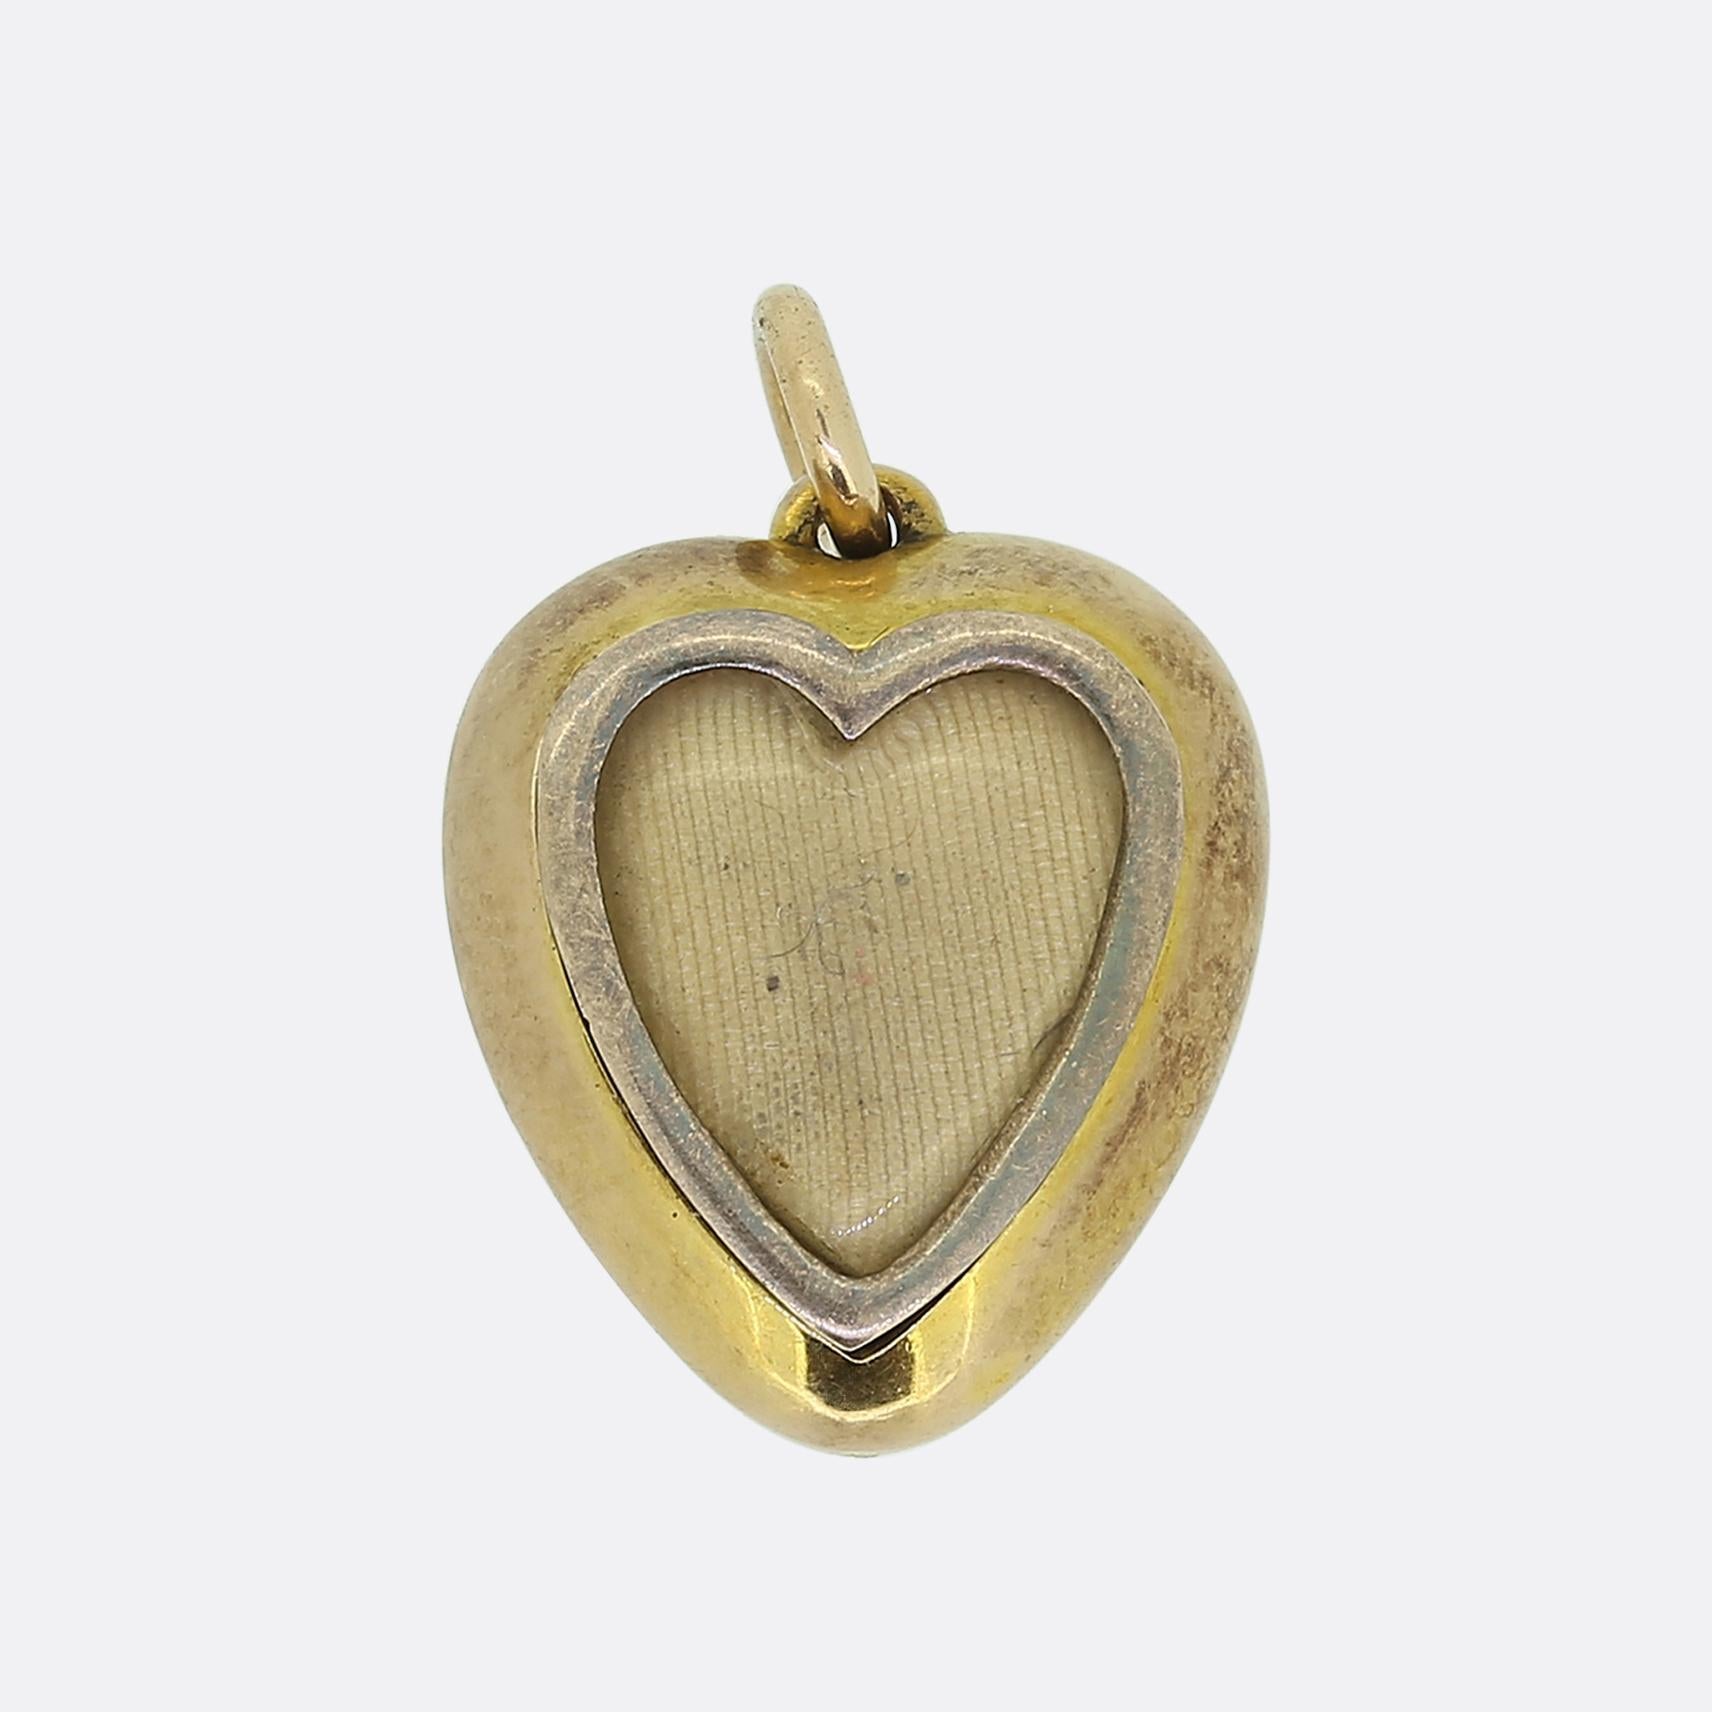 Here we have a delightful locket pendant dating back to the Victorian era. This romantic piece has been crafted into the shape of love heart with a single round faceted emerald set at the centre. A vast array of round seed pearls pervade the rest of